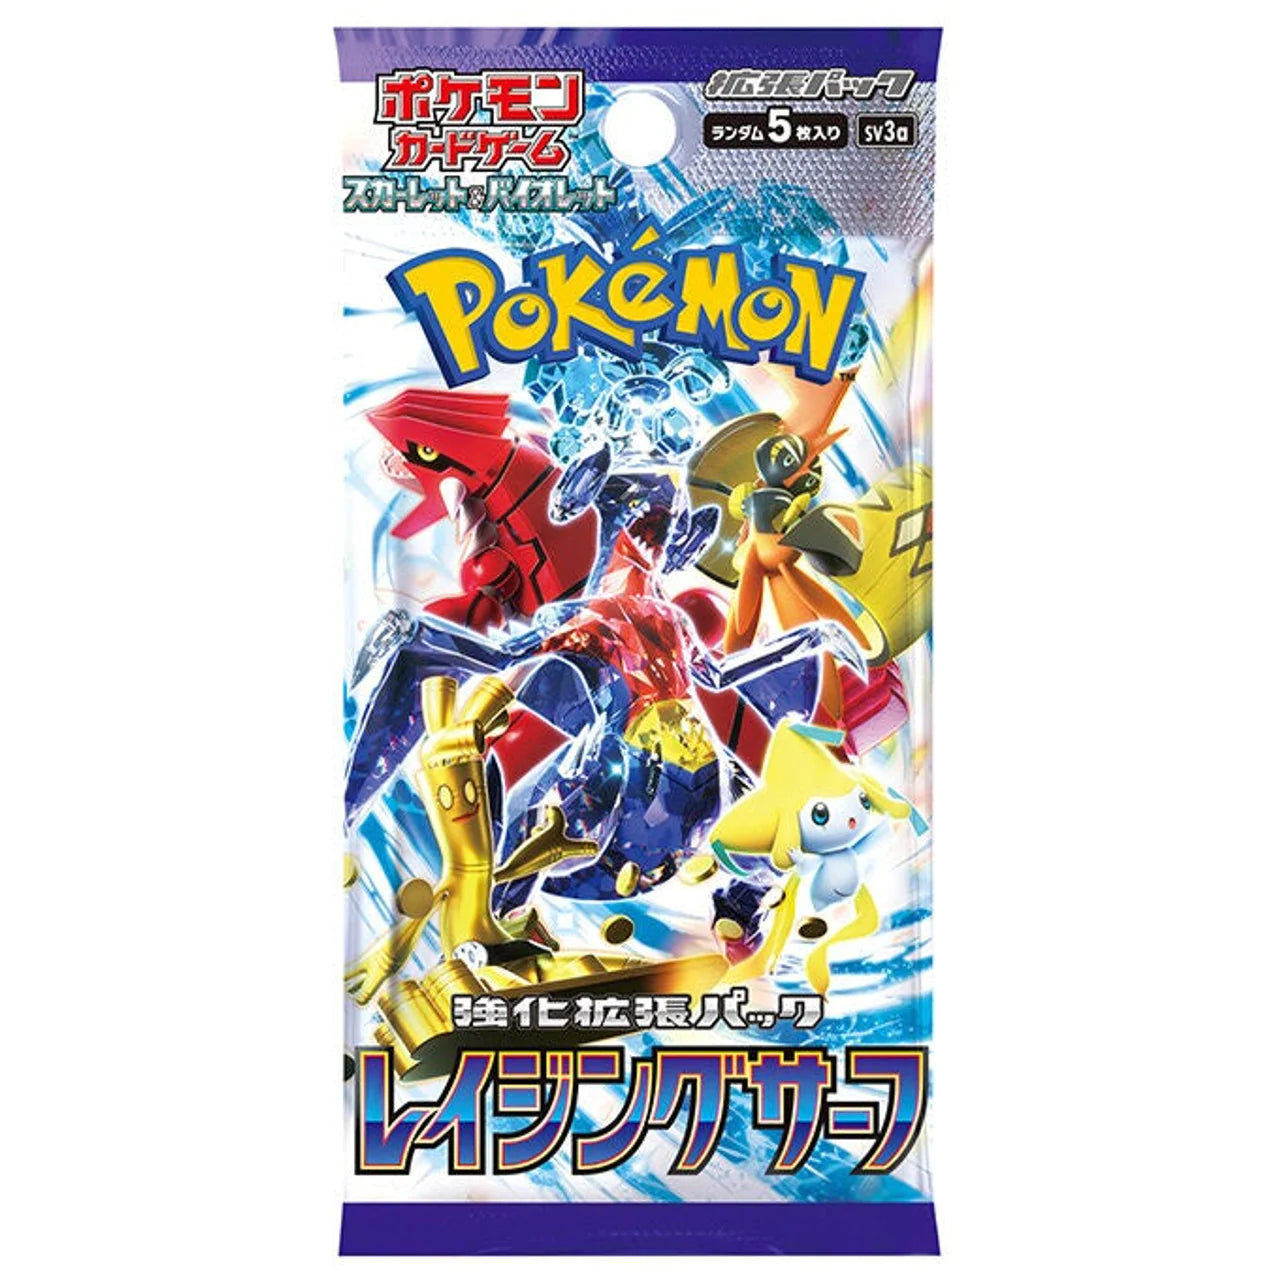 RAGING SURF BOOSTER PACK (Japanese - 5 cards)